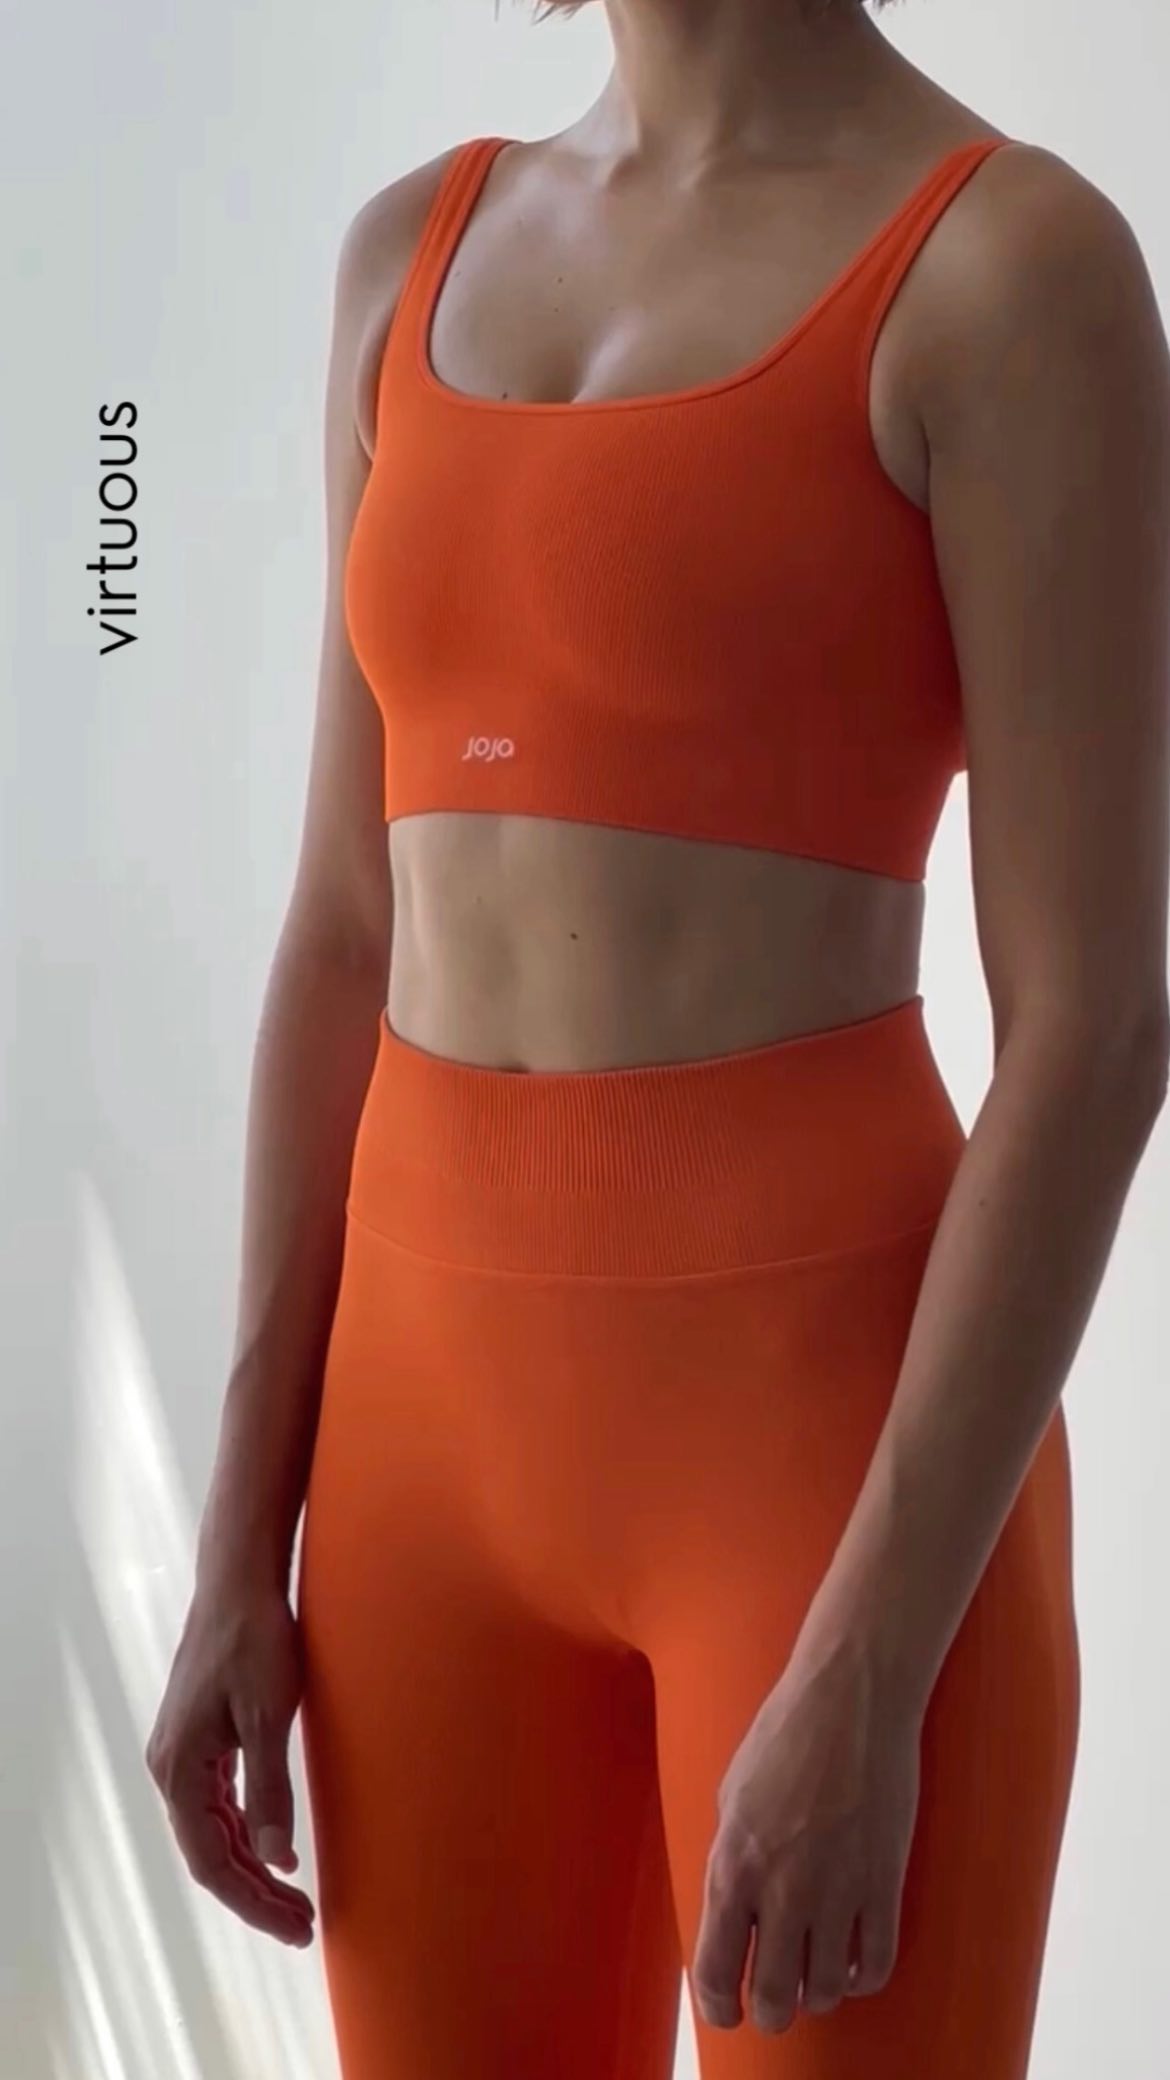 Orange You Glad To See Josephine Skriver Get Her Booty Sculpted!?